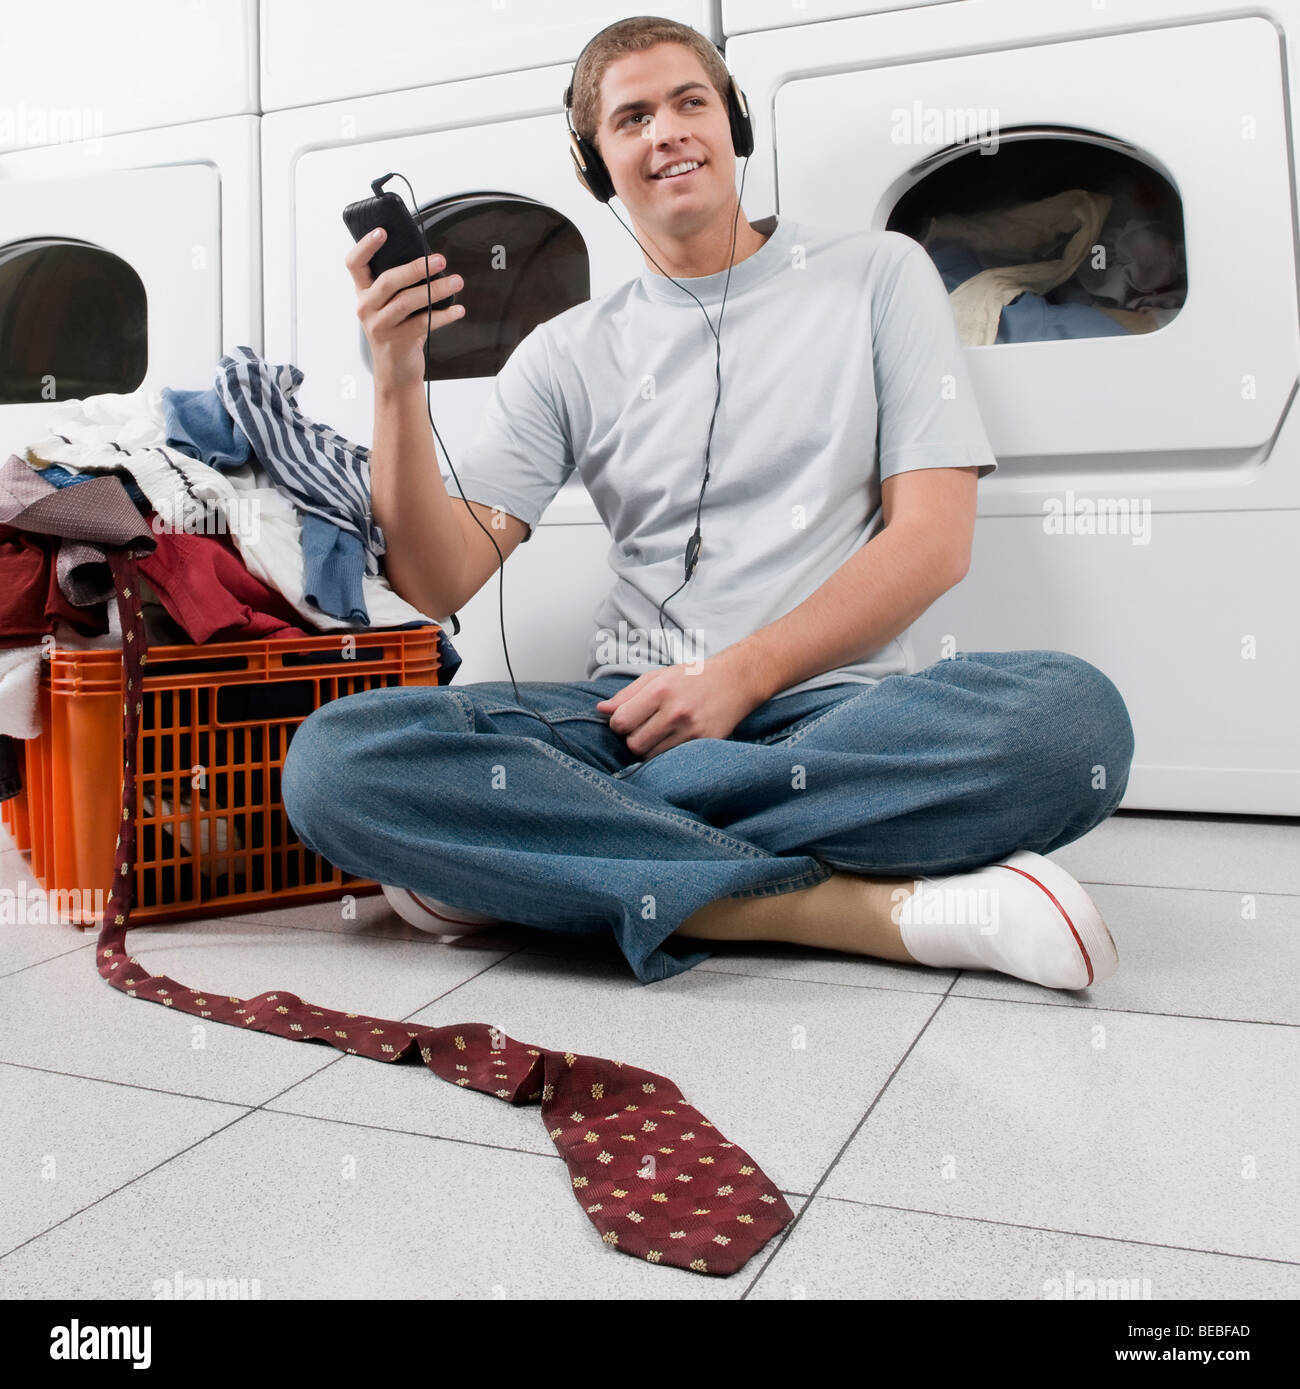 Man listening to an MP3 player in a laundromat Stock Photo